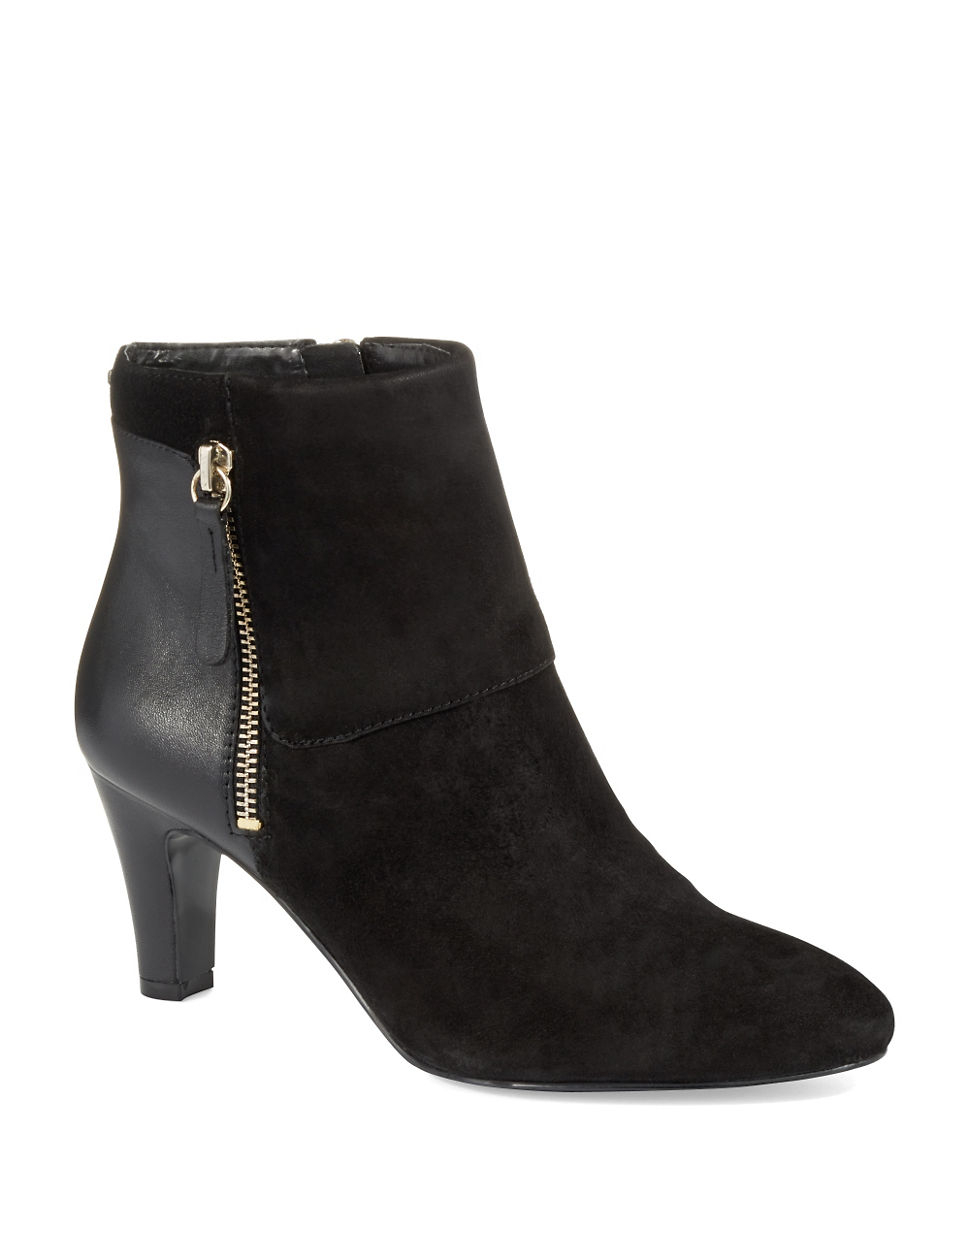 Bandolino Woodford Ankle Boots in Black | Lyst